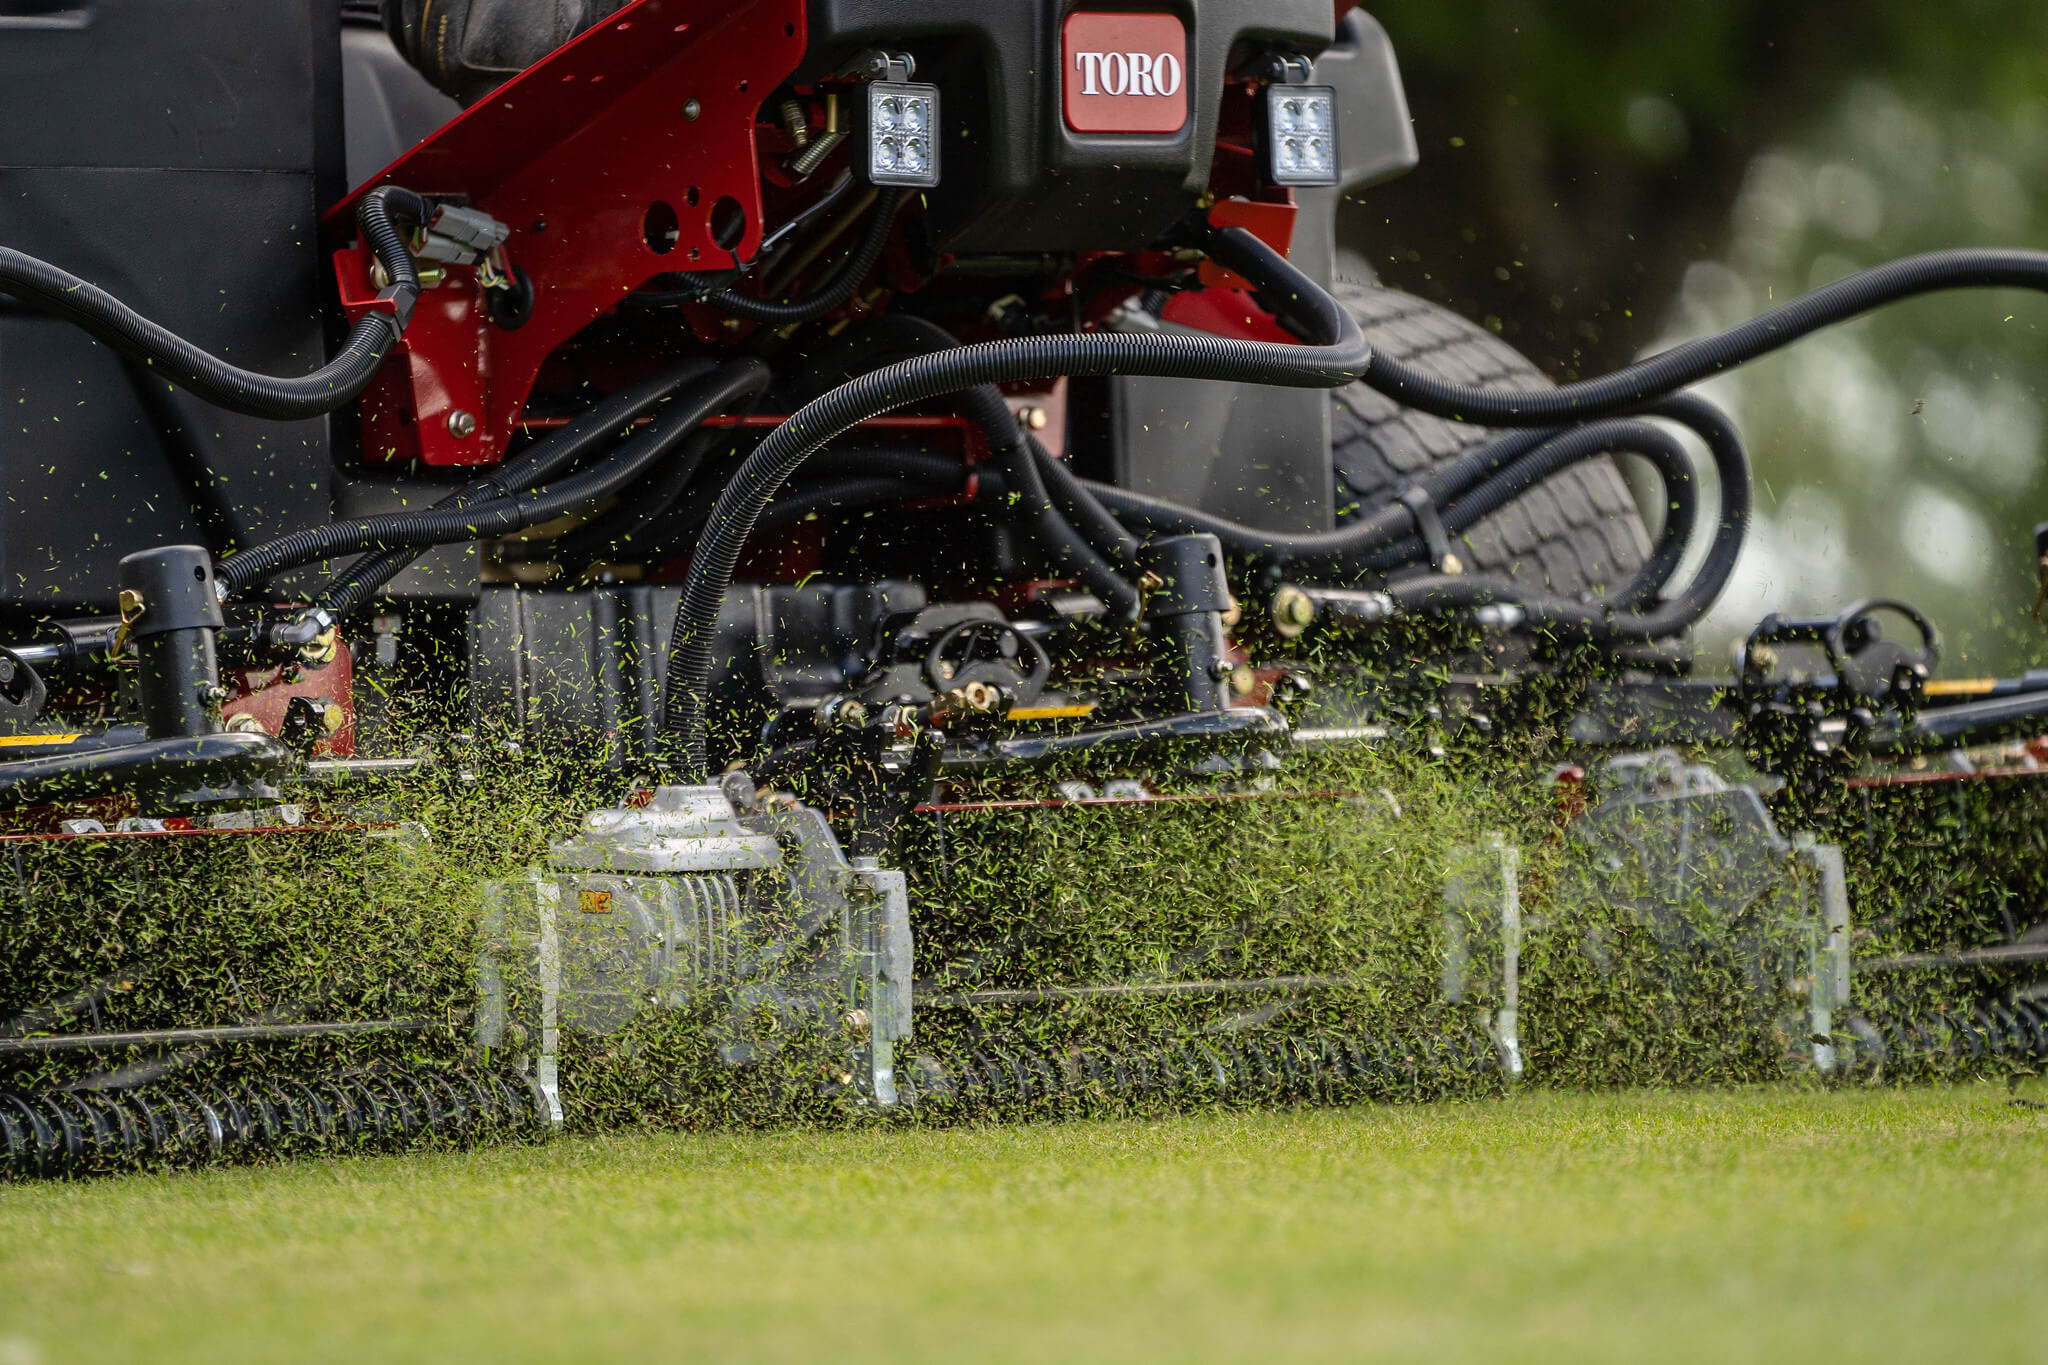 A Toro mower cutting grass. Grass is being thrown in the air as the cylinders cut it.